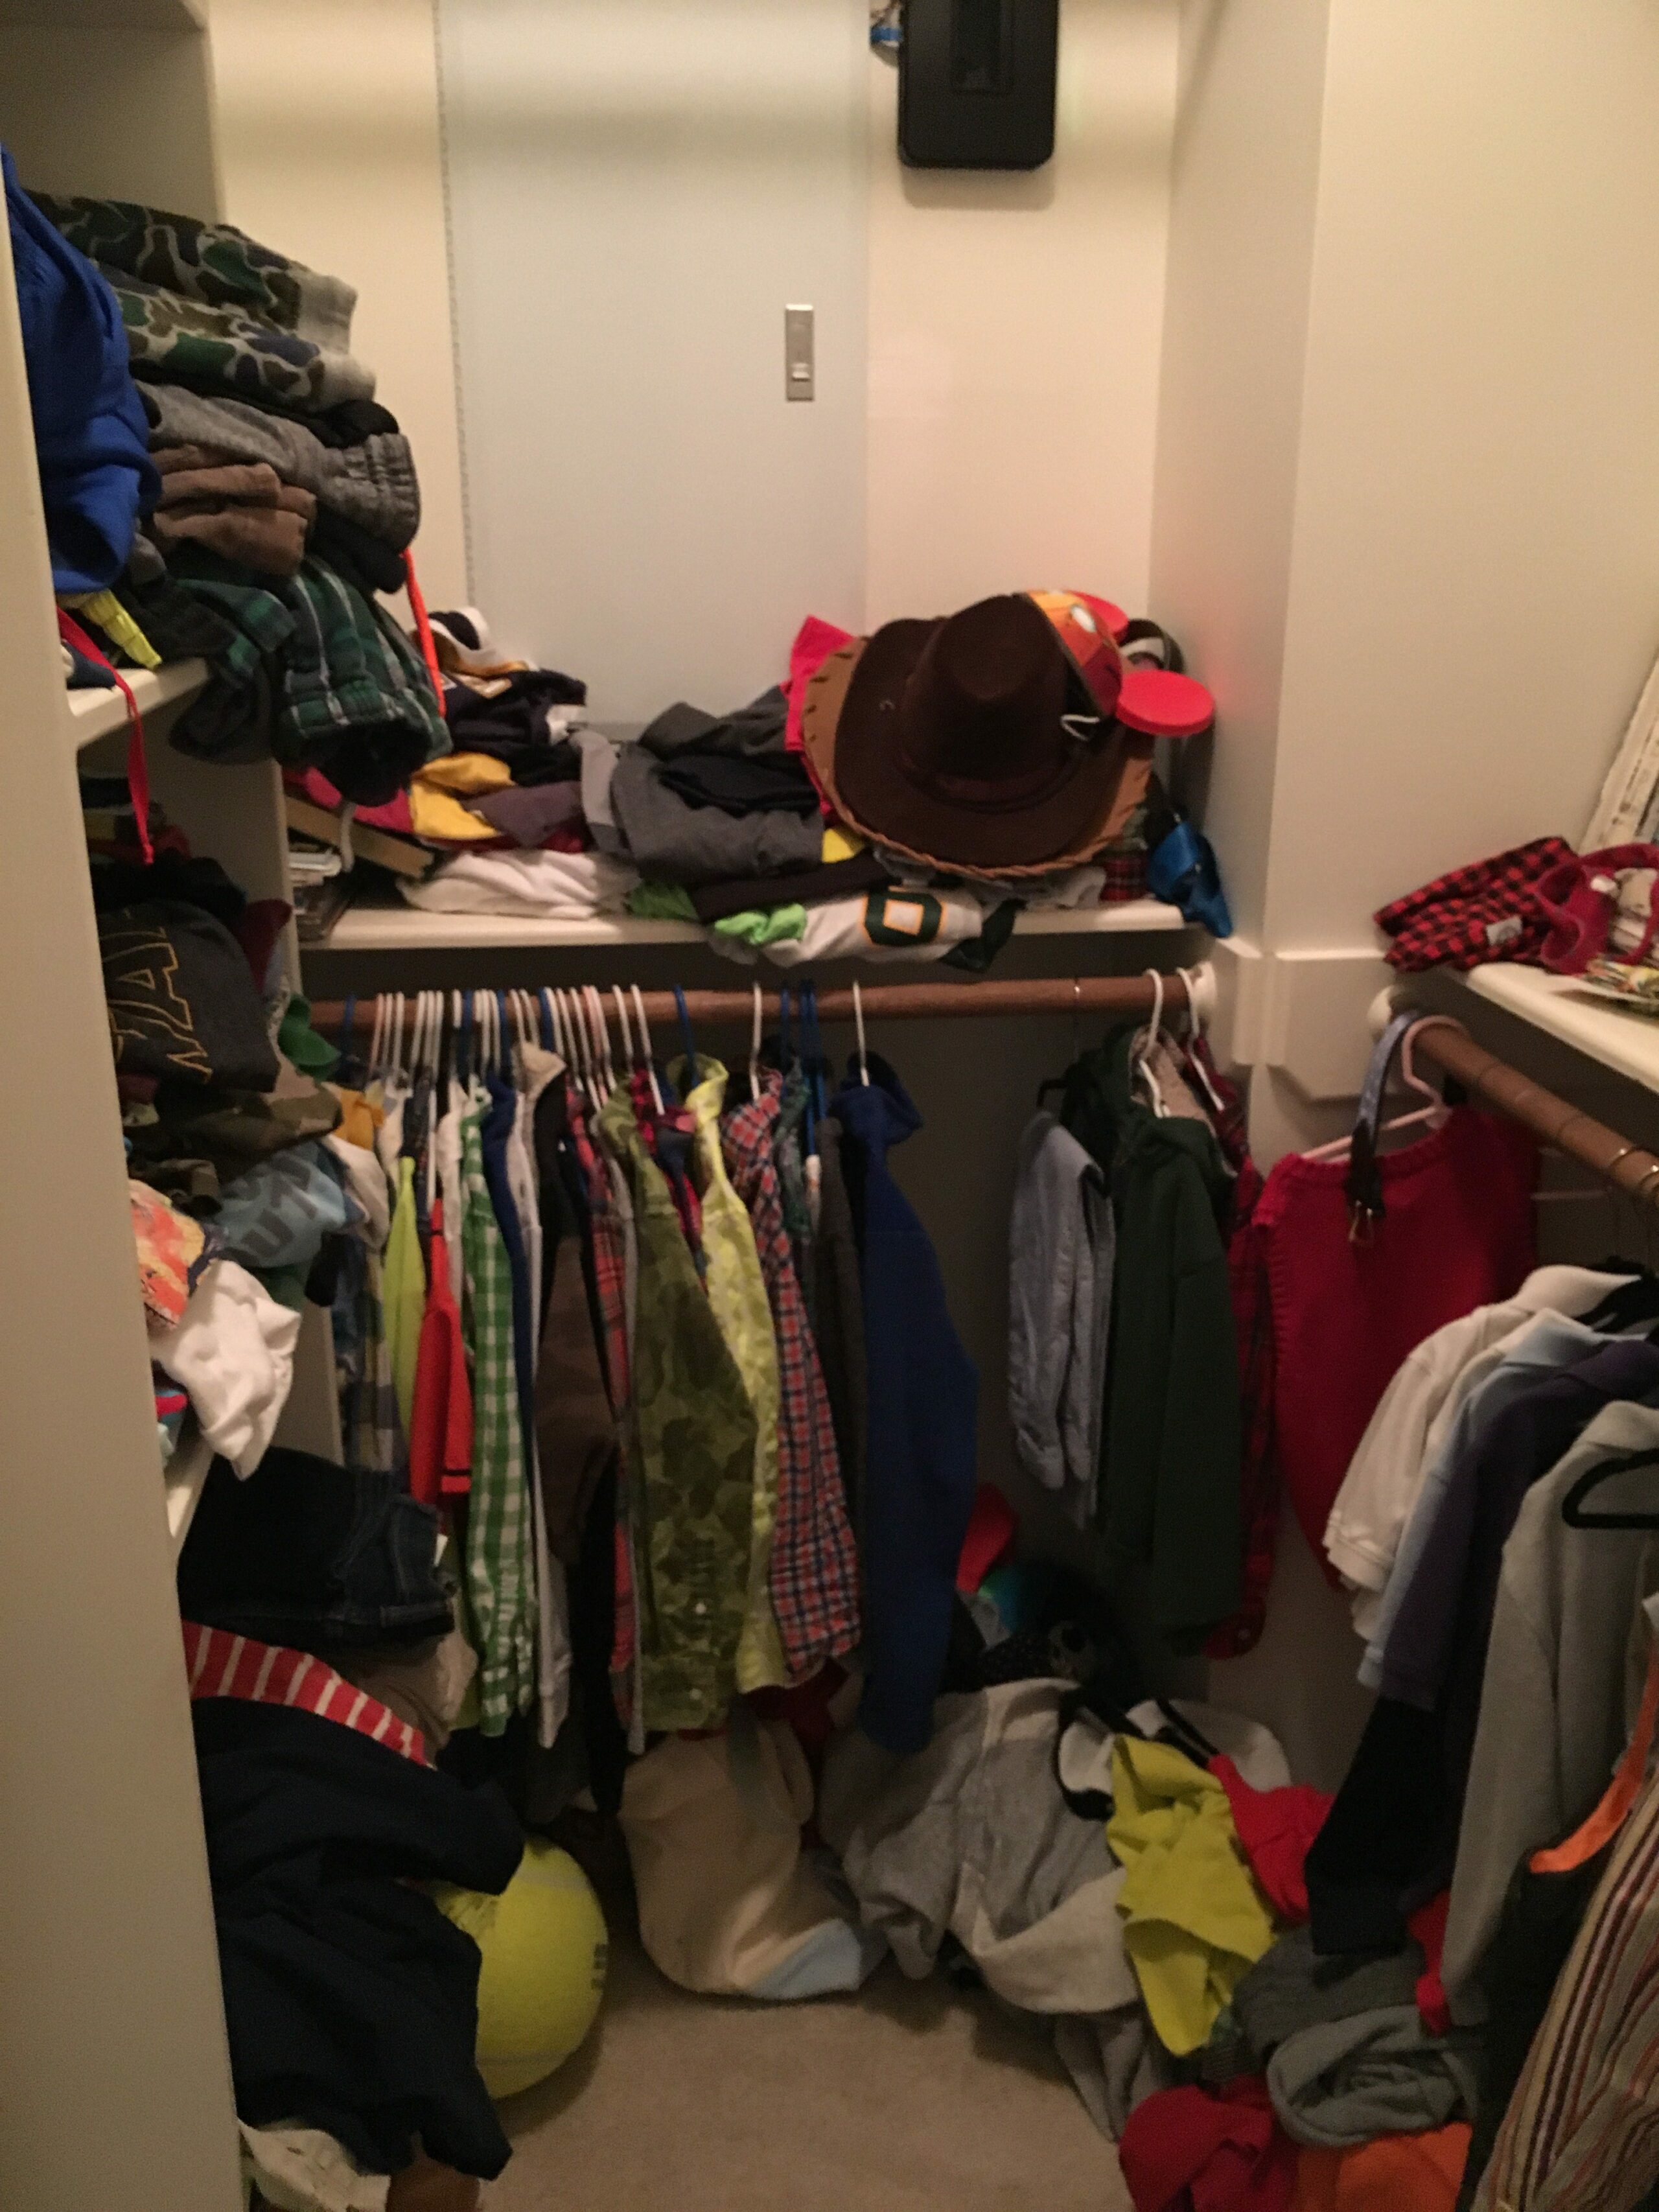 5 Super Helpful Closet Organization Tips for your Family featured by popular Houston lifestyle blogger, Fancy Ashley - BEFORE